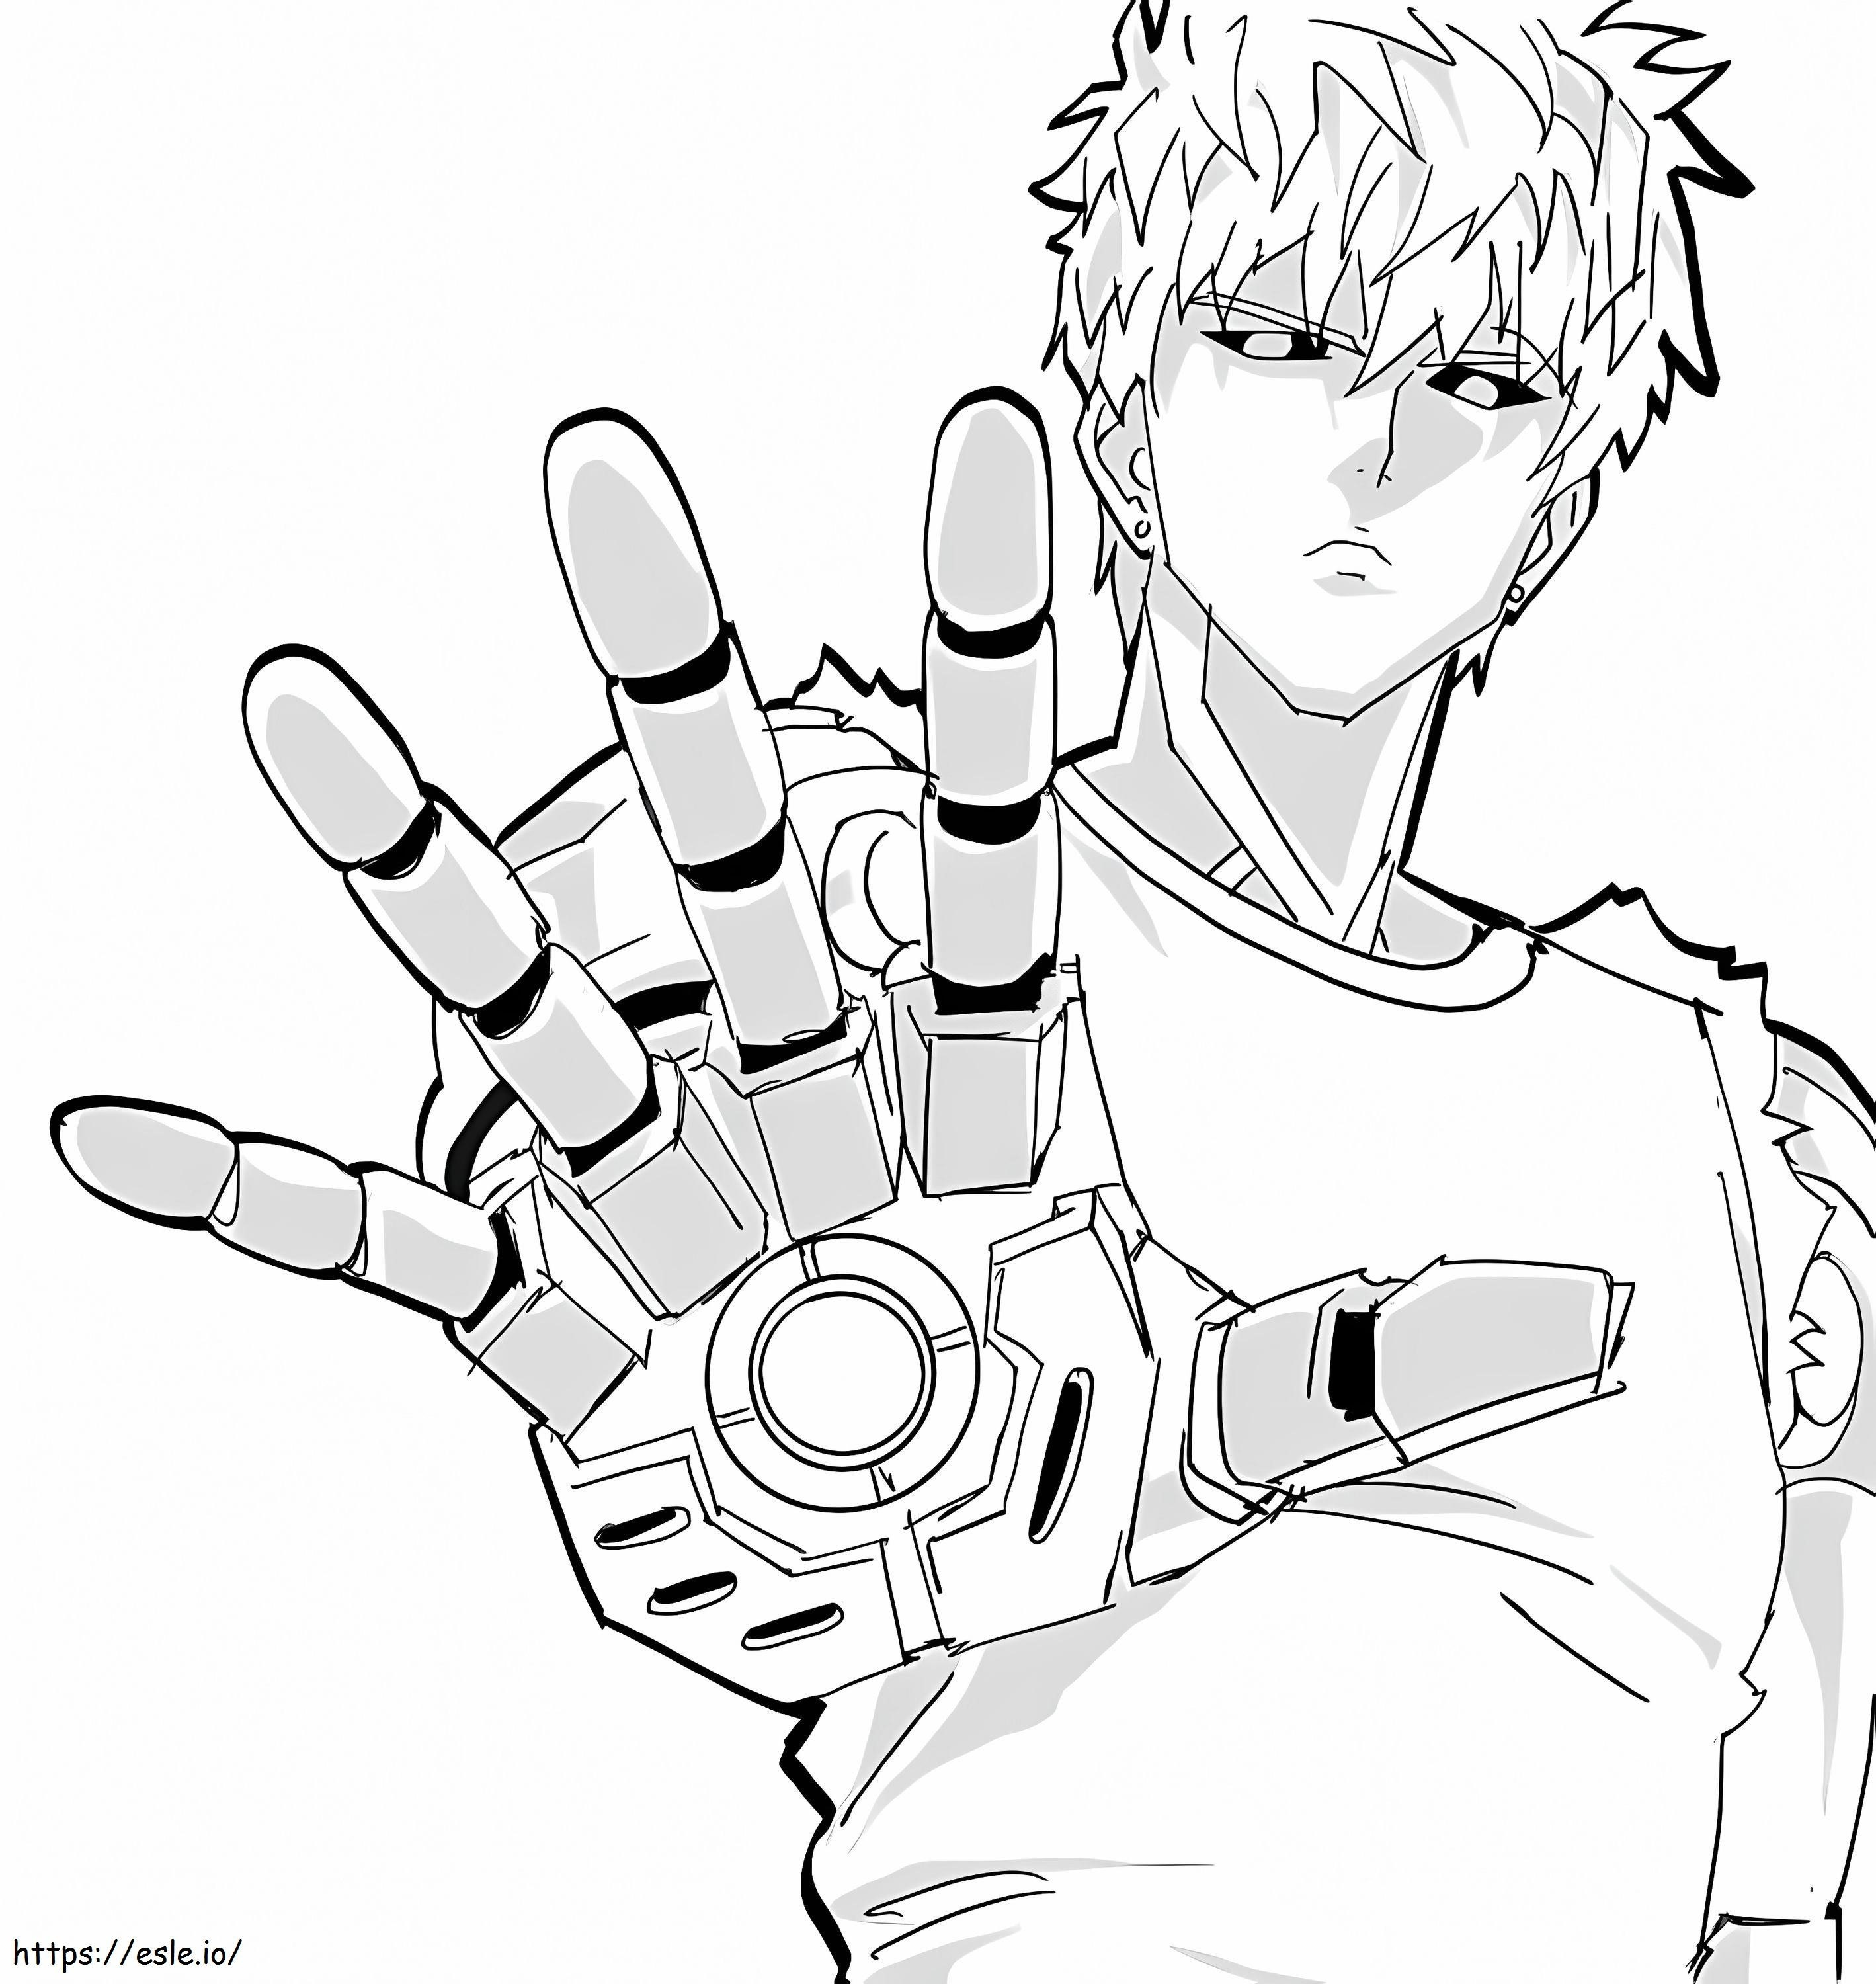 Perfect Genos coloring page